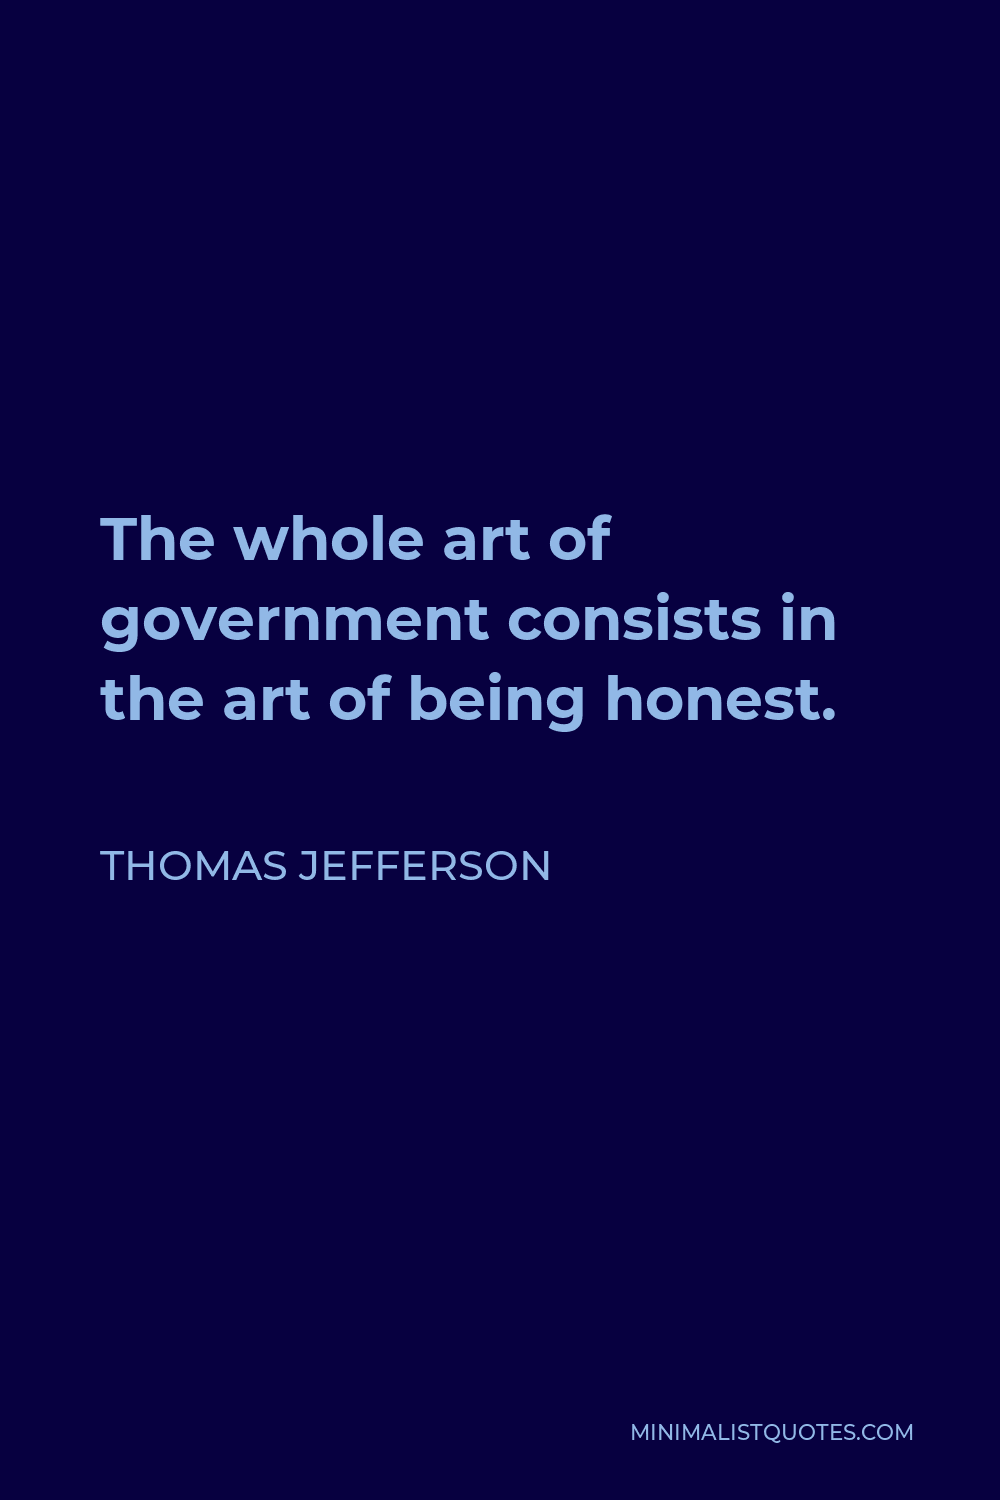 Thomas Jefferson Quote - The whole art of government consists in the art of being honest.